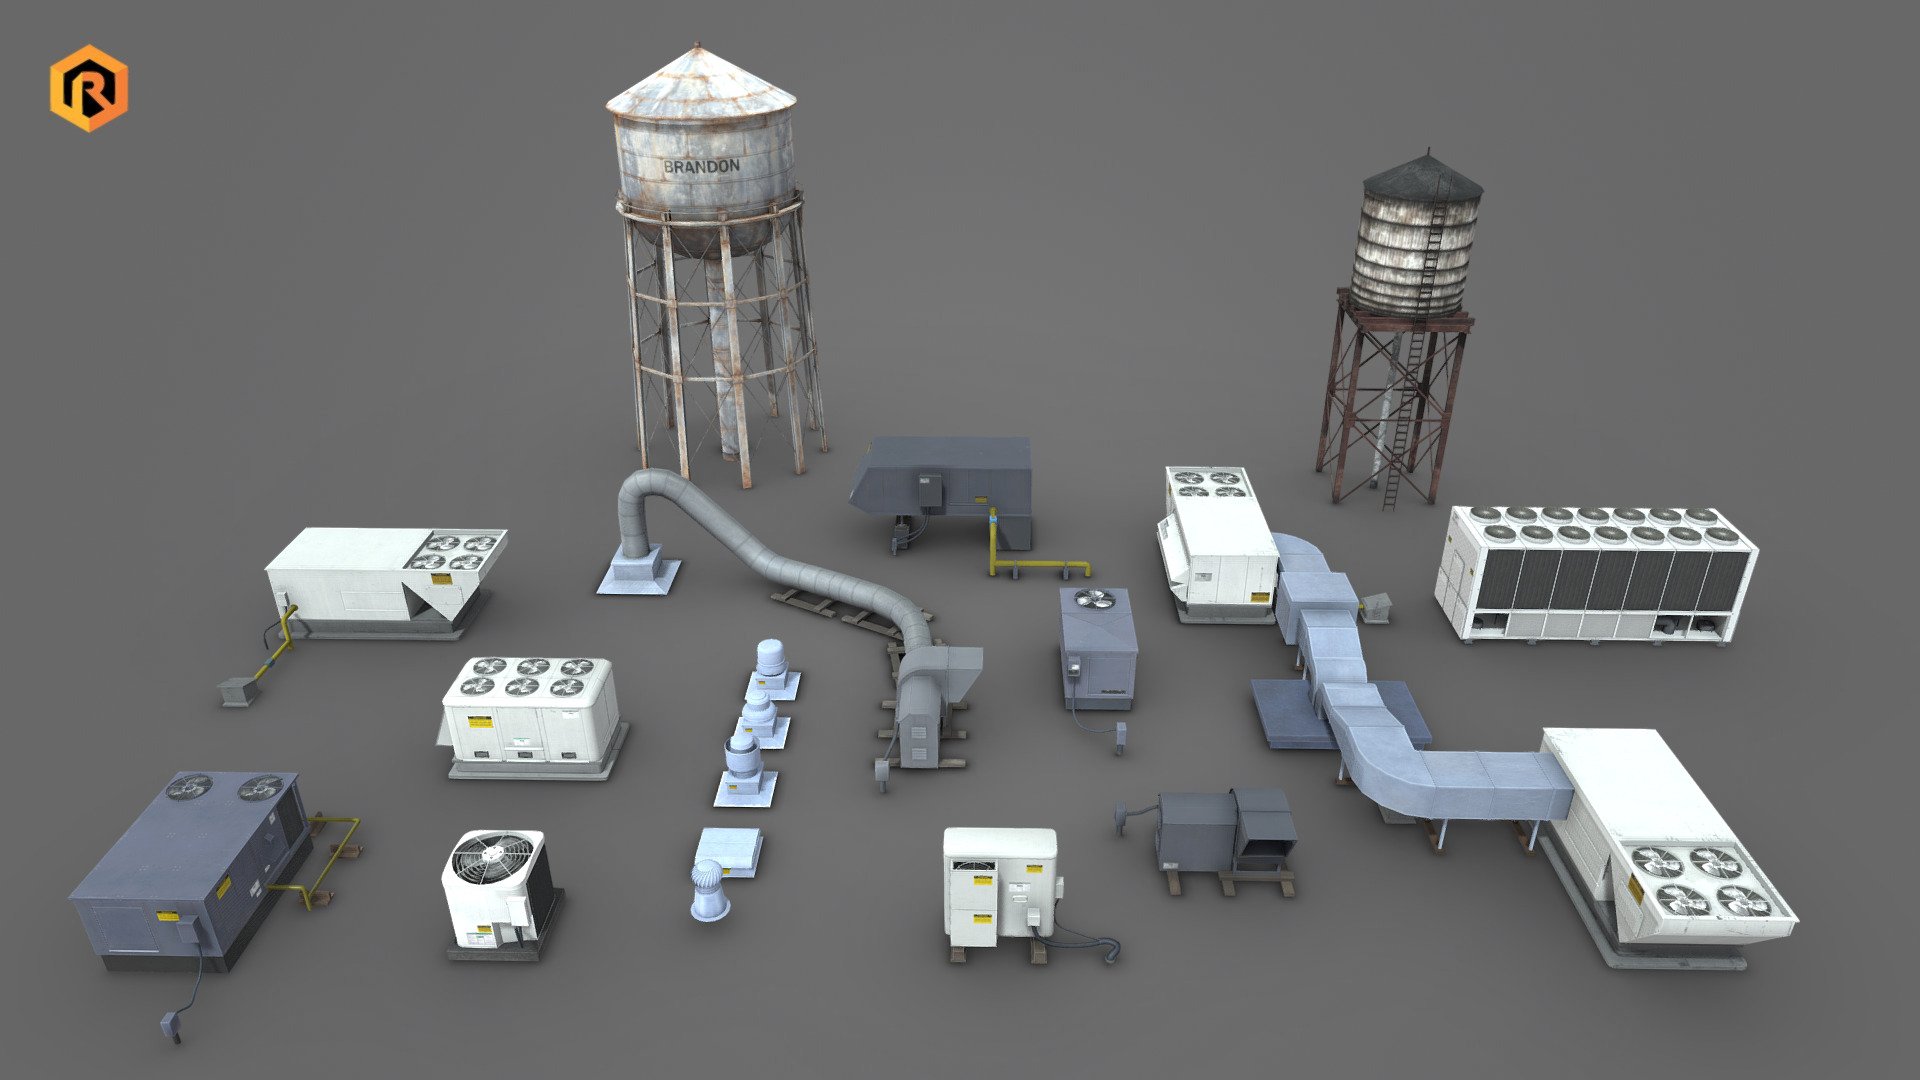 The collection of 16 HVAC low-poly 3D models with additional 2 water towers.  HVAC stands for Heating, Ventilation, and Air Conditioning.

Models are best for use in games and other VR / AR, real-time applications such as Unity or Unreal Engine.

Technical details:




Each object uses its own Diffuse and AO texture (mostly from 1024 up to 2048).

The number of triangles ranges from 312 to 7204.

Models are correctly divided into main body and fans.

Models are completely unwrapped.

Pivot points are correctly placed to suit the animation process.

Models are scaled to approximate real-world size (centimeters).

All nodes, materials, and textures are appropriately named.

Lot of additional file formats included (Blender, 3D Studio Max, Unity, fbx etc.)

More file formats are available in additional zip file on product page.

Please feel free to contact me if you have any questions or need any support for this asset.

Support e-mail: support@rescue3d.com - HVAC Models Collection - Buy Royalty Free 3D model by Rescue3D Assets (@rescue3d) 3d model